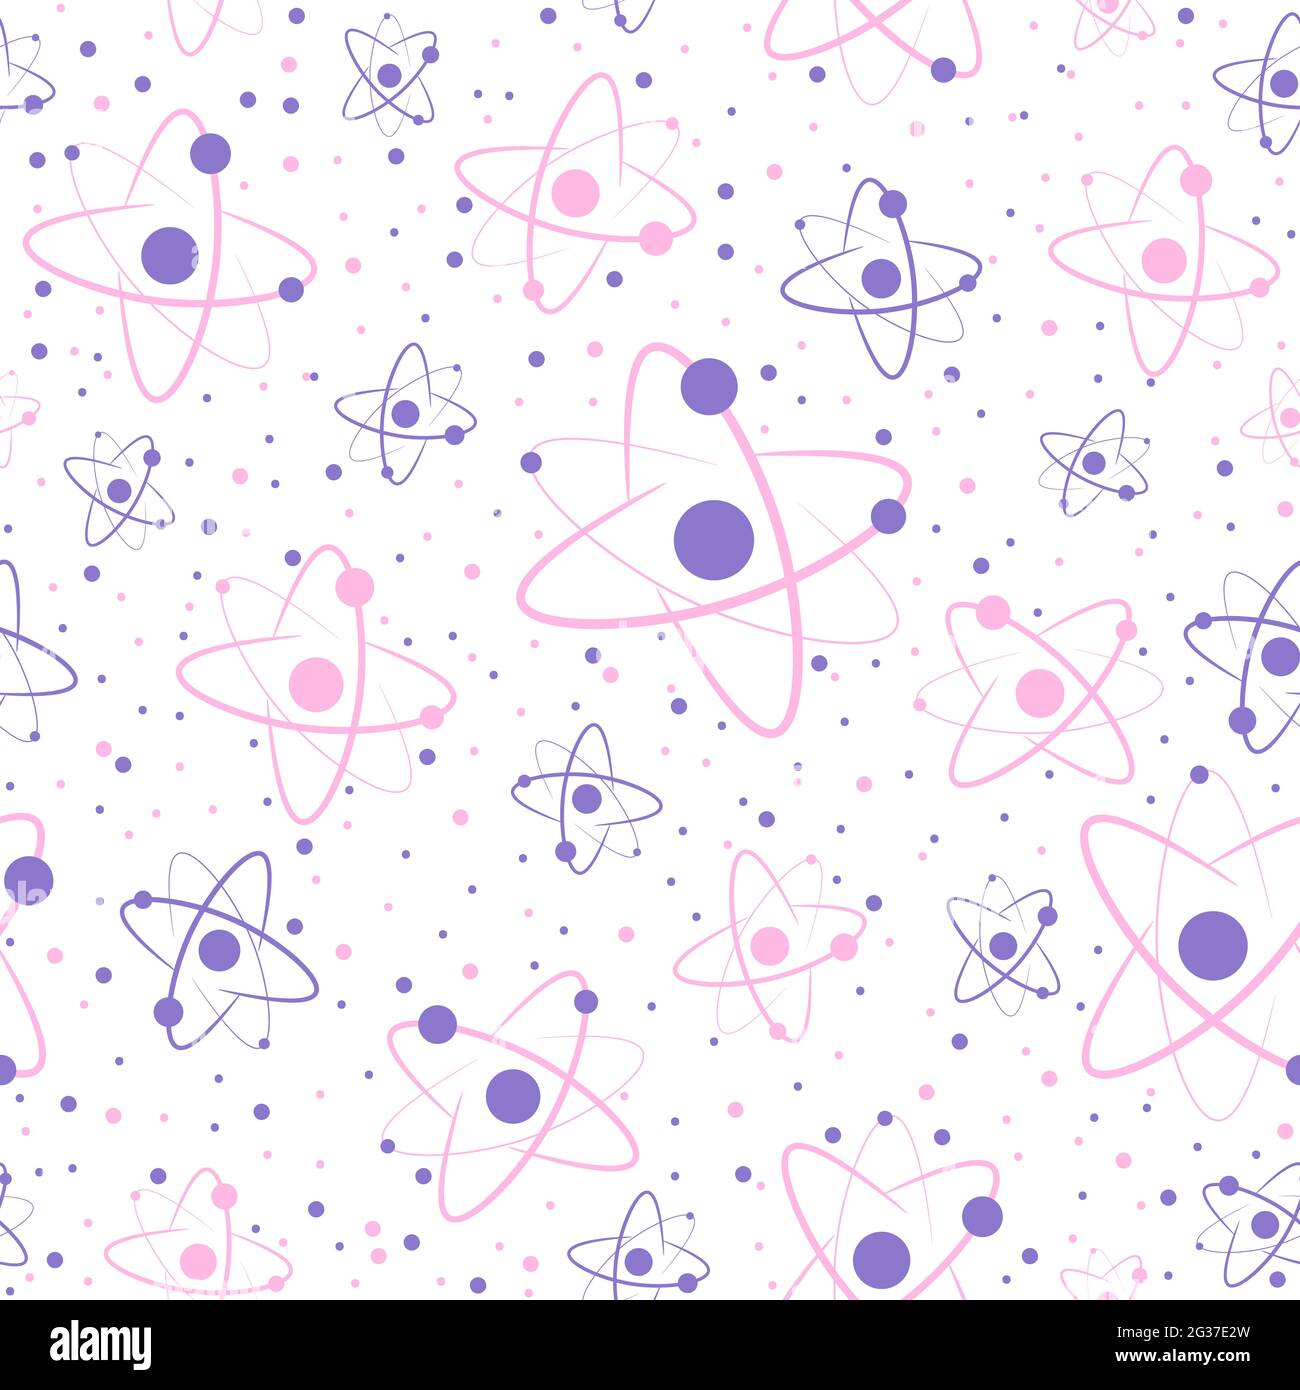 Pink and purple seamless pattern with chemical elements. Repeat background with atoms, protons and neutrons. Energy and molecular cells texture about Stock Vector